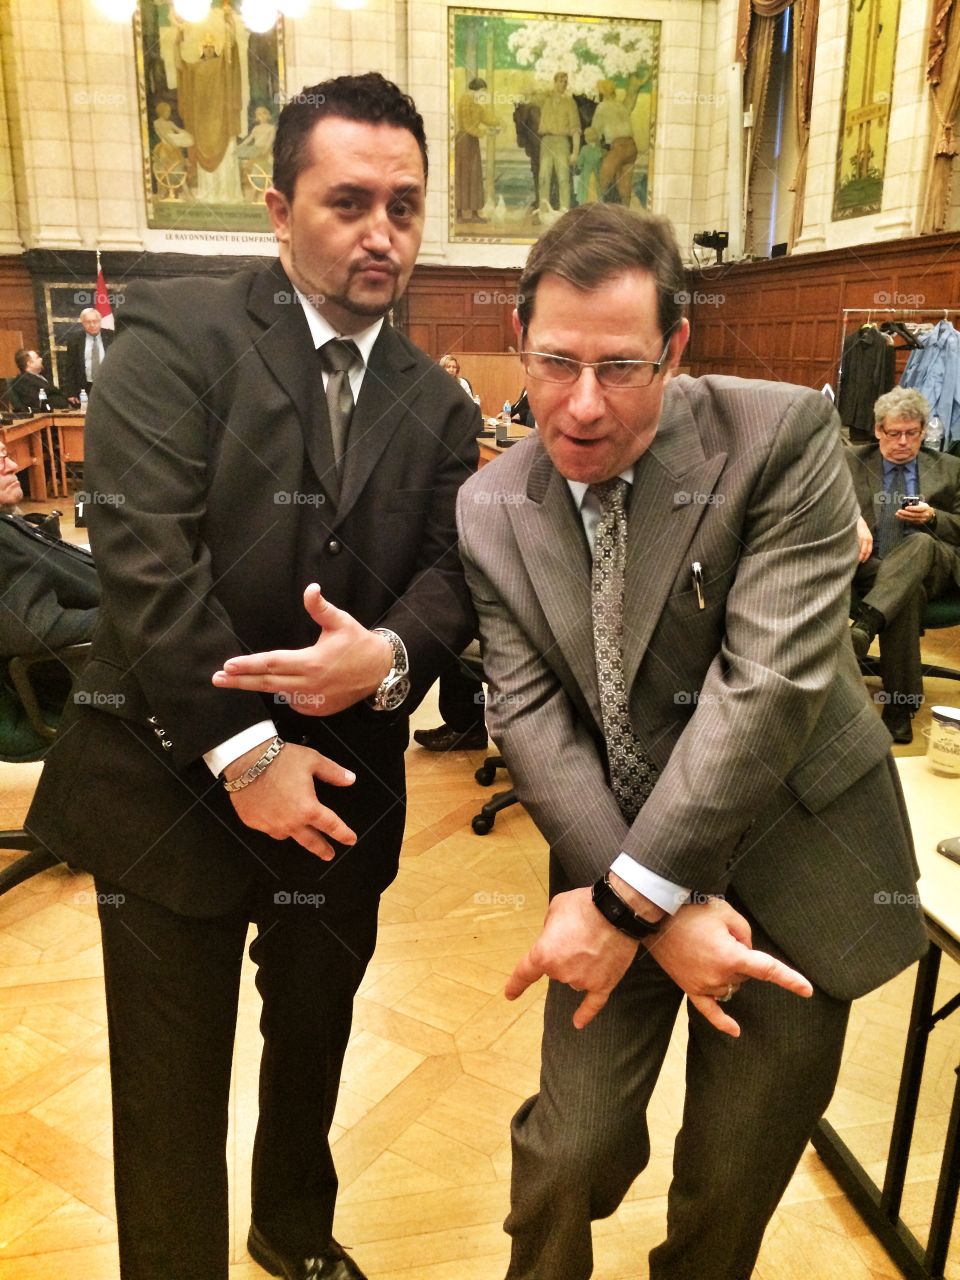 Acting in a movie on parliament hill

Ottawa Canada 